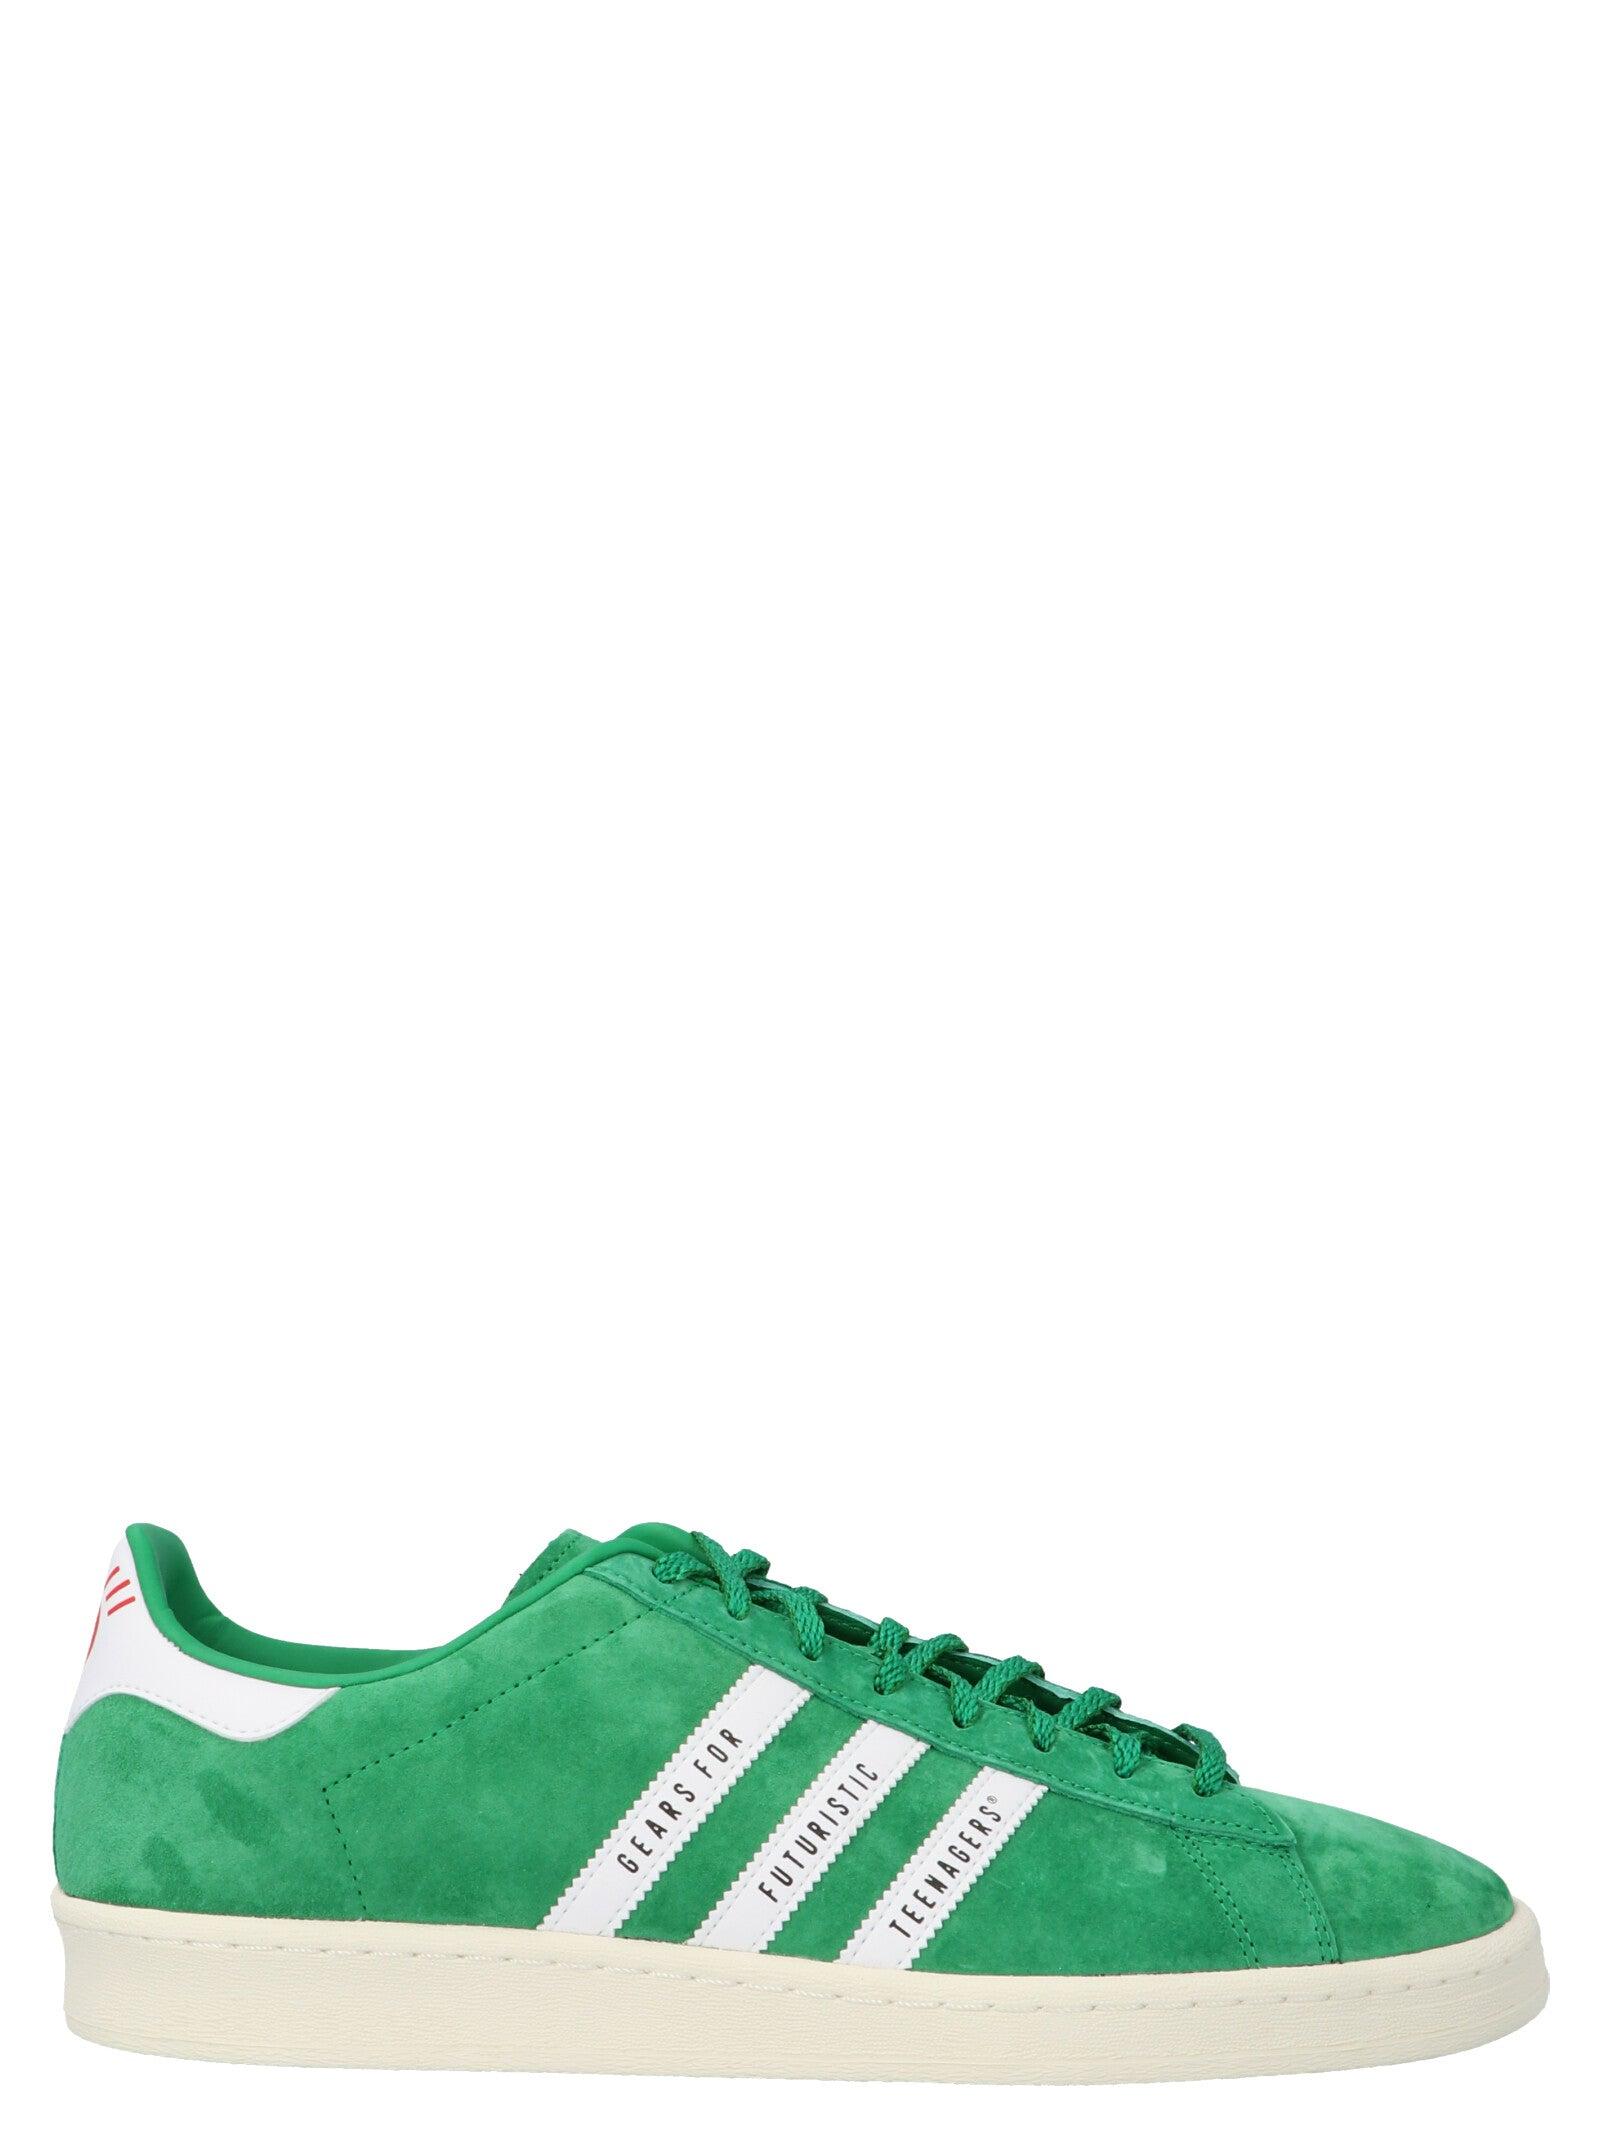 adidas Originals Suede X Human Made Campus in Green/White (Green) for Men -  Save 62% - Lyst